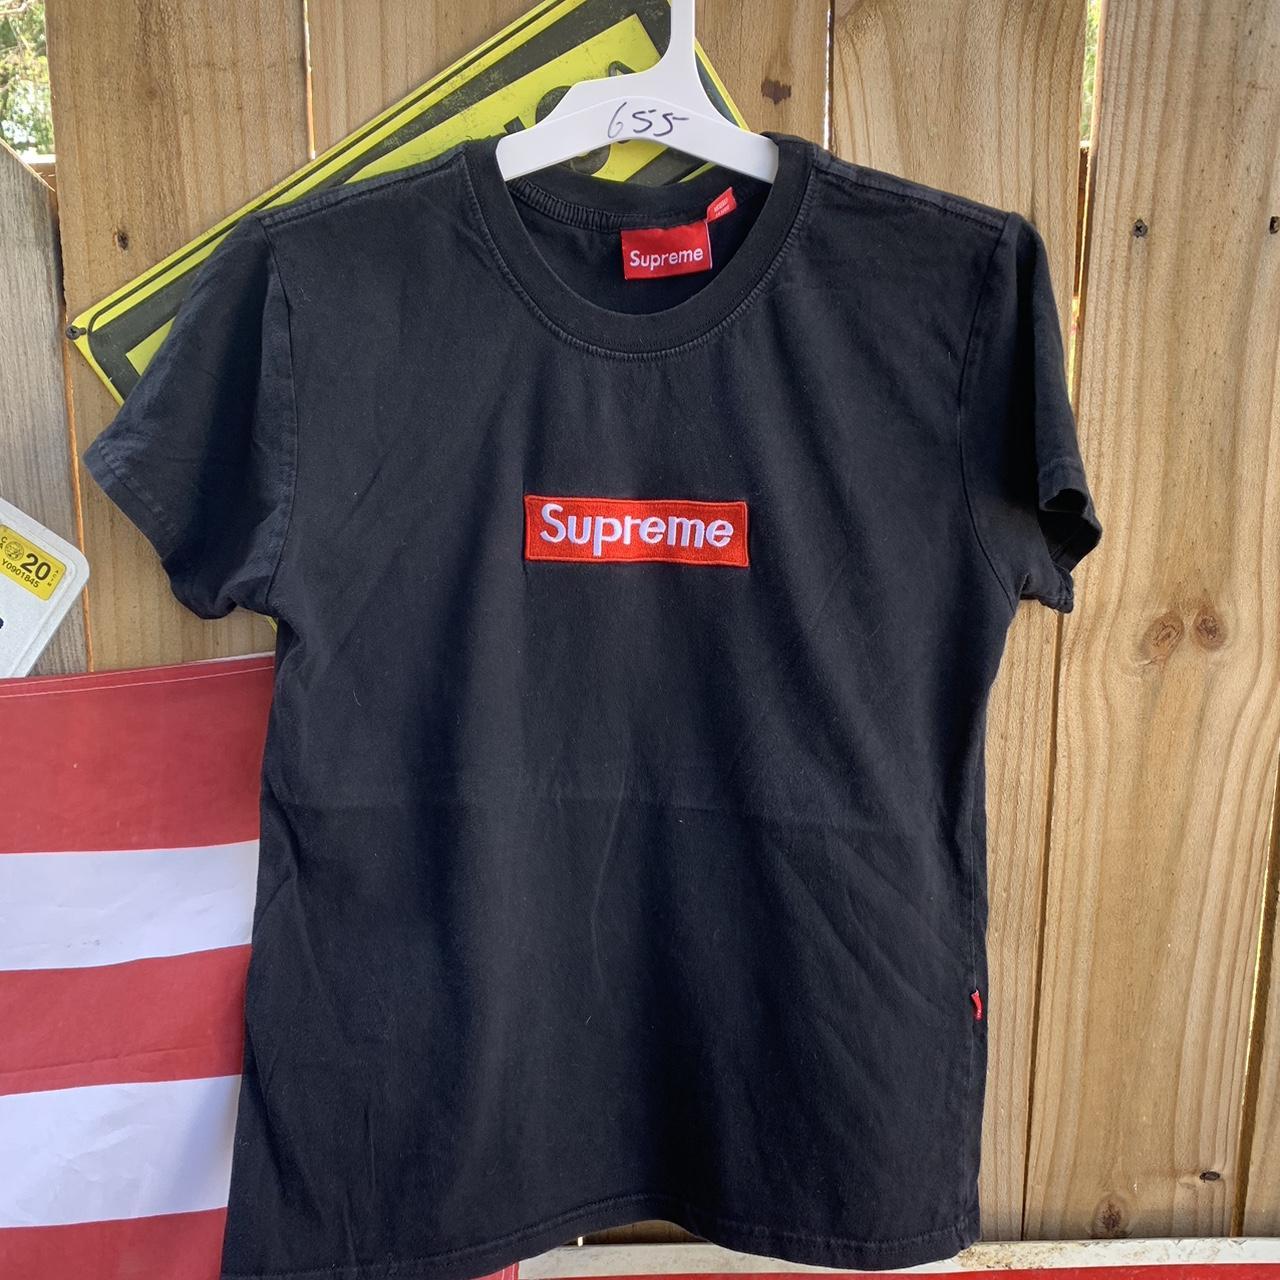 Supreme embroidered T-shirt According to the... - Depop